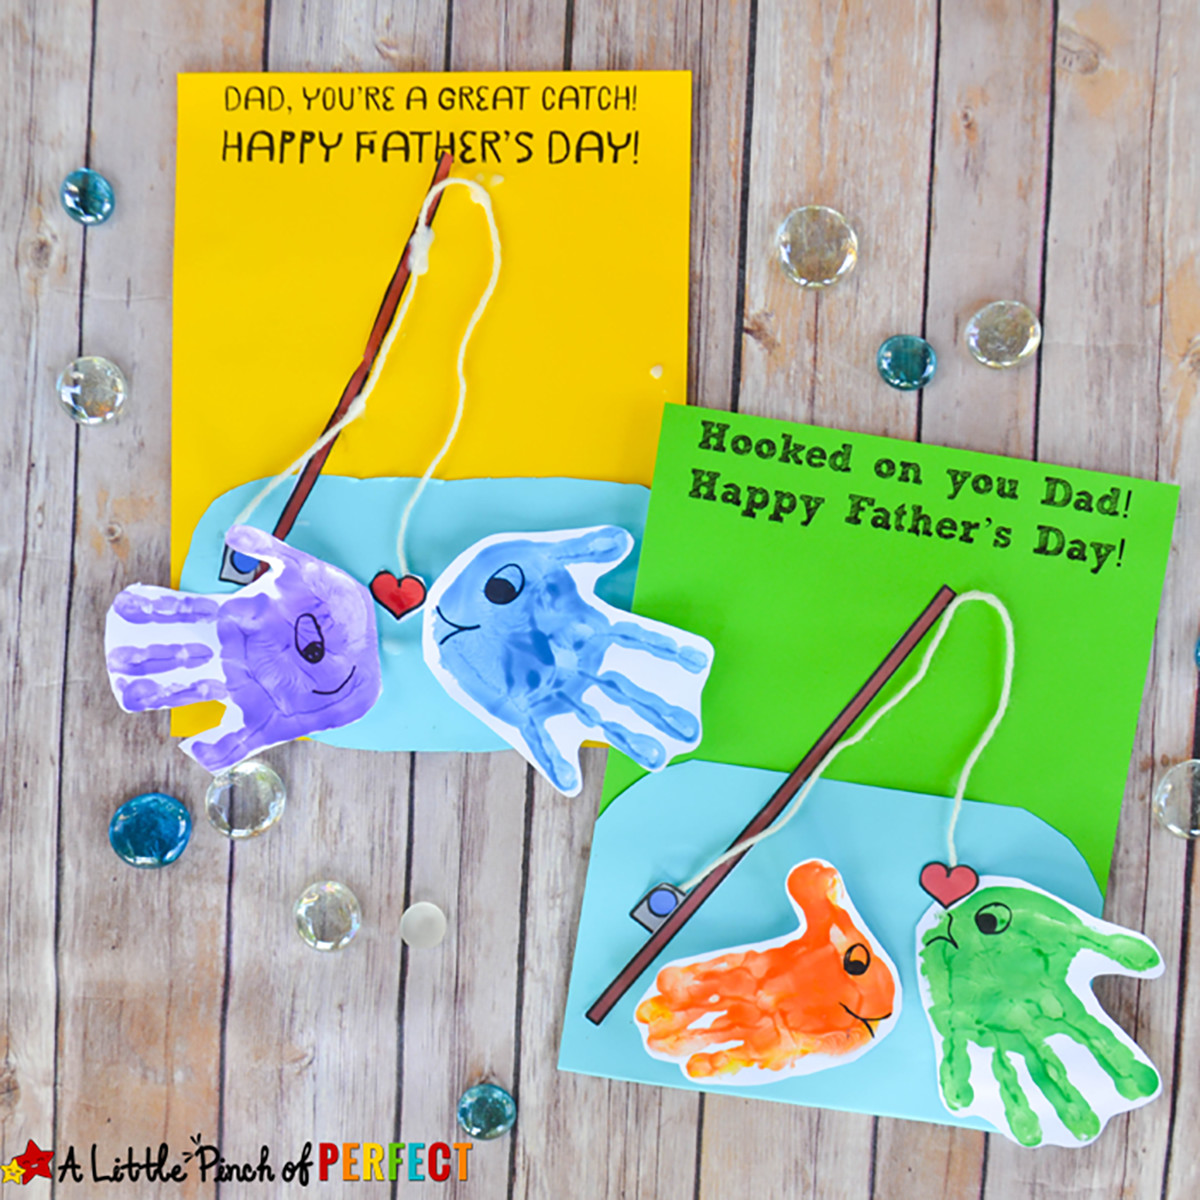 Fathers Day Crafts For Preschoolers
 DIY Preschool Father s Day Gifts Your Little es Will